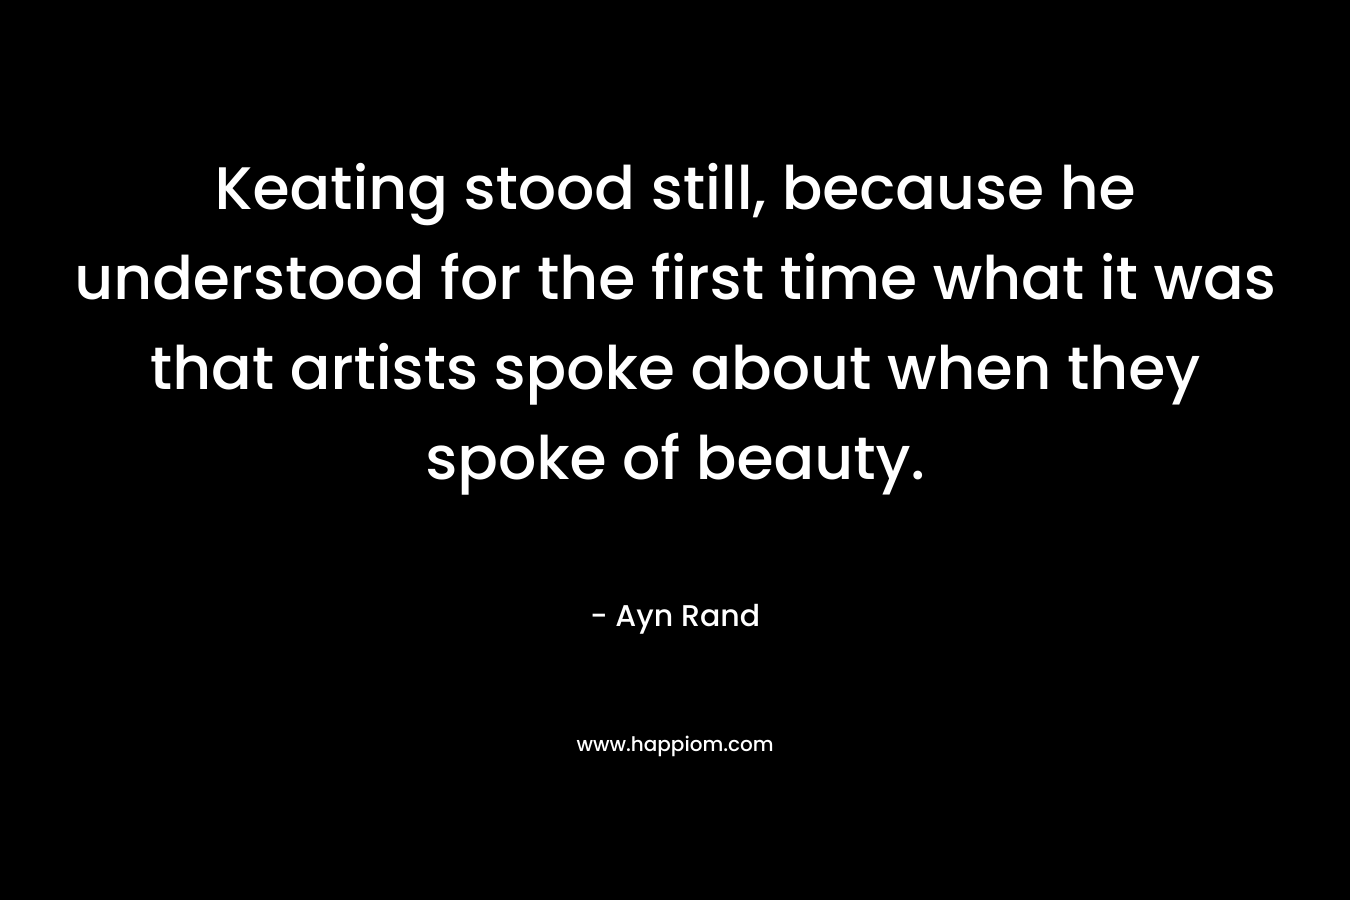 Keating stood still, because he understood for the first time what it was that artists spoke about when they spoke of beauty.